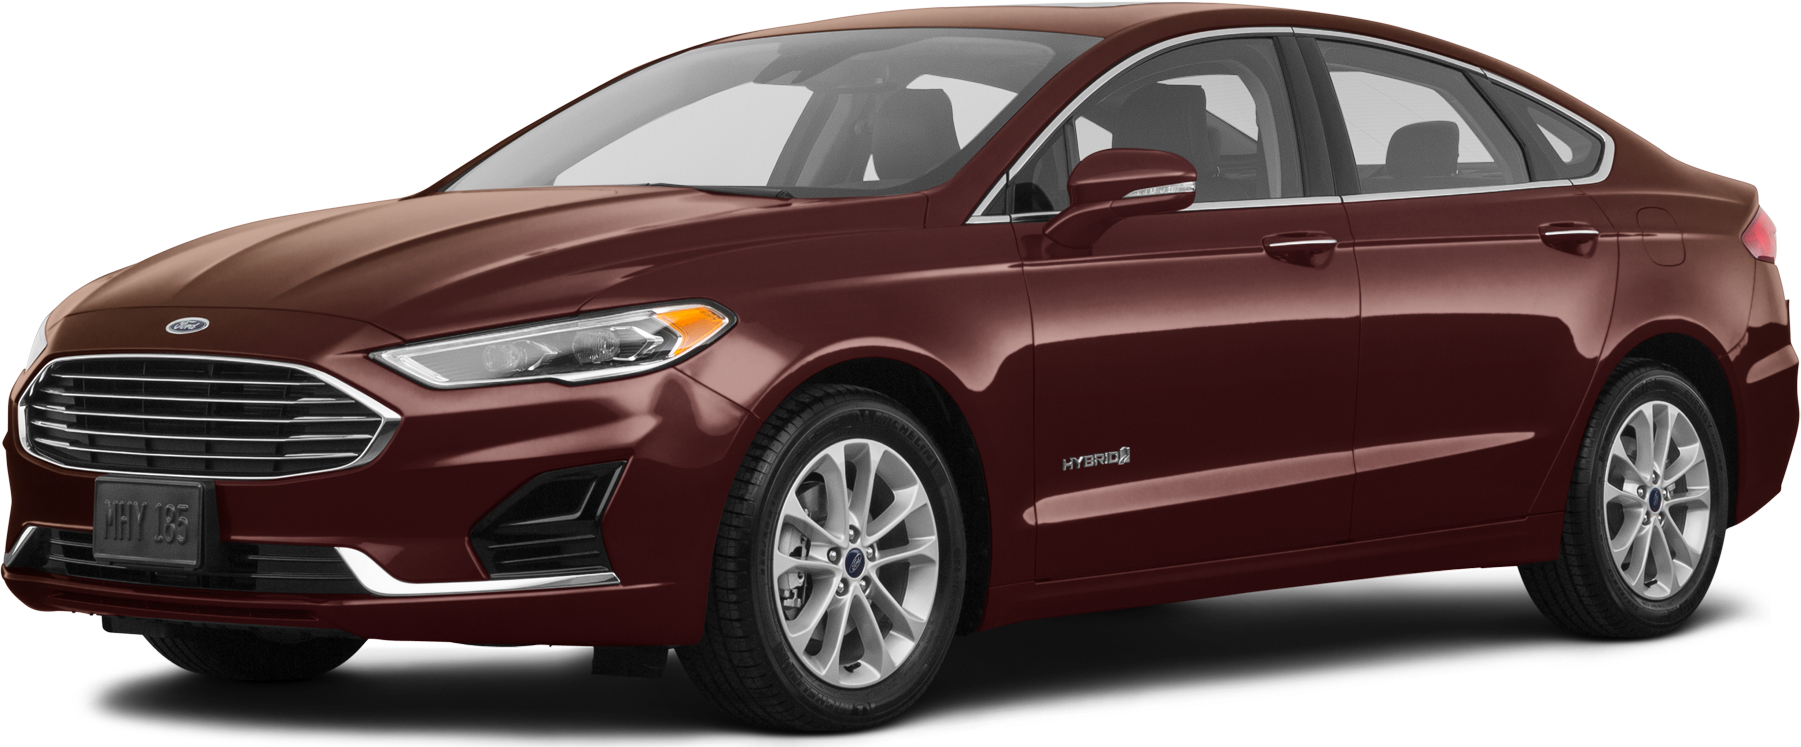 Burgundy Ford Fusion Hybrid Side View